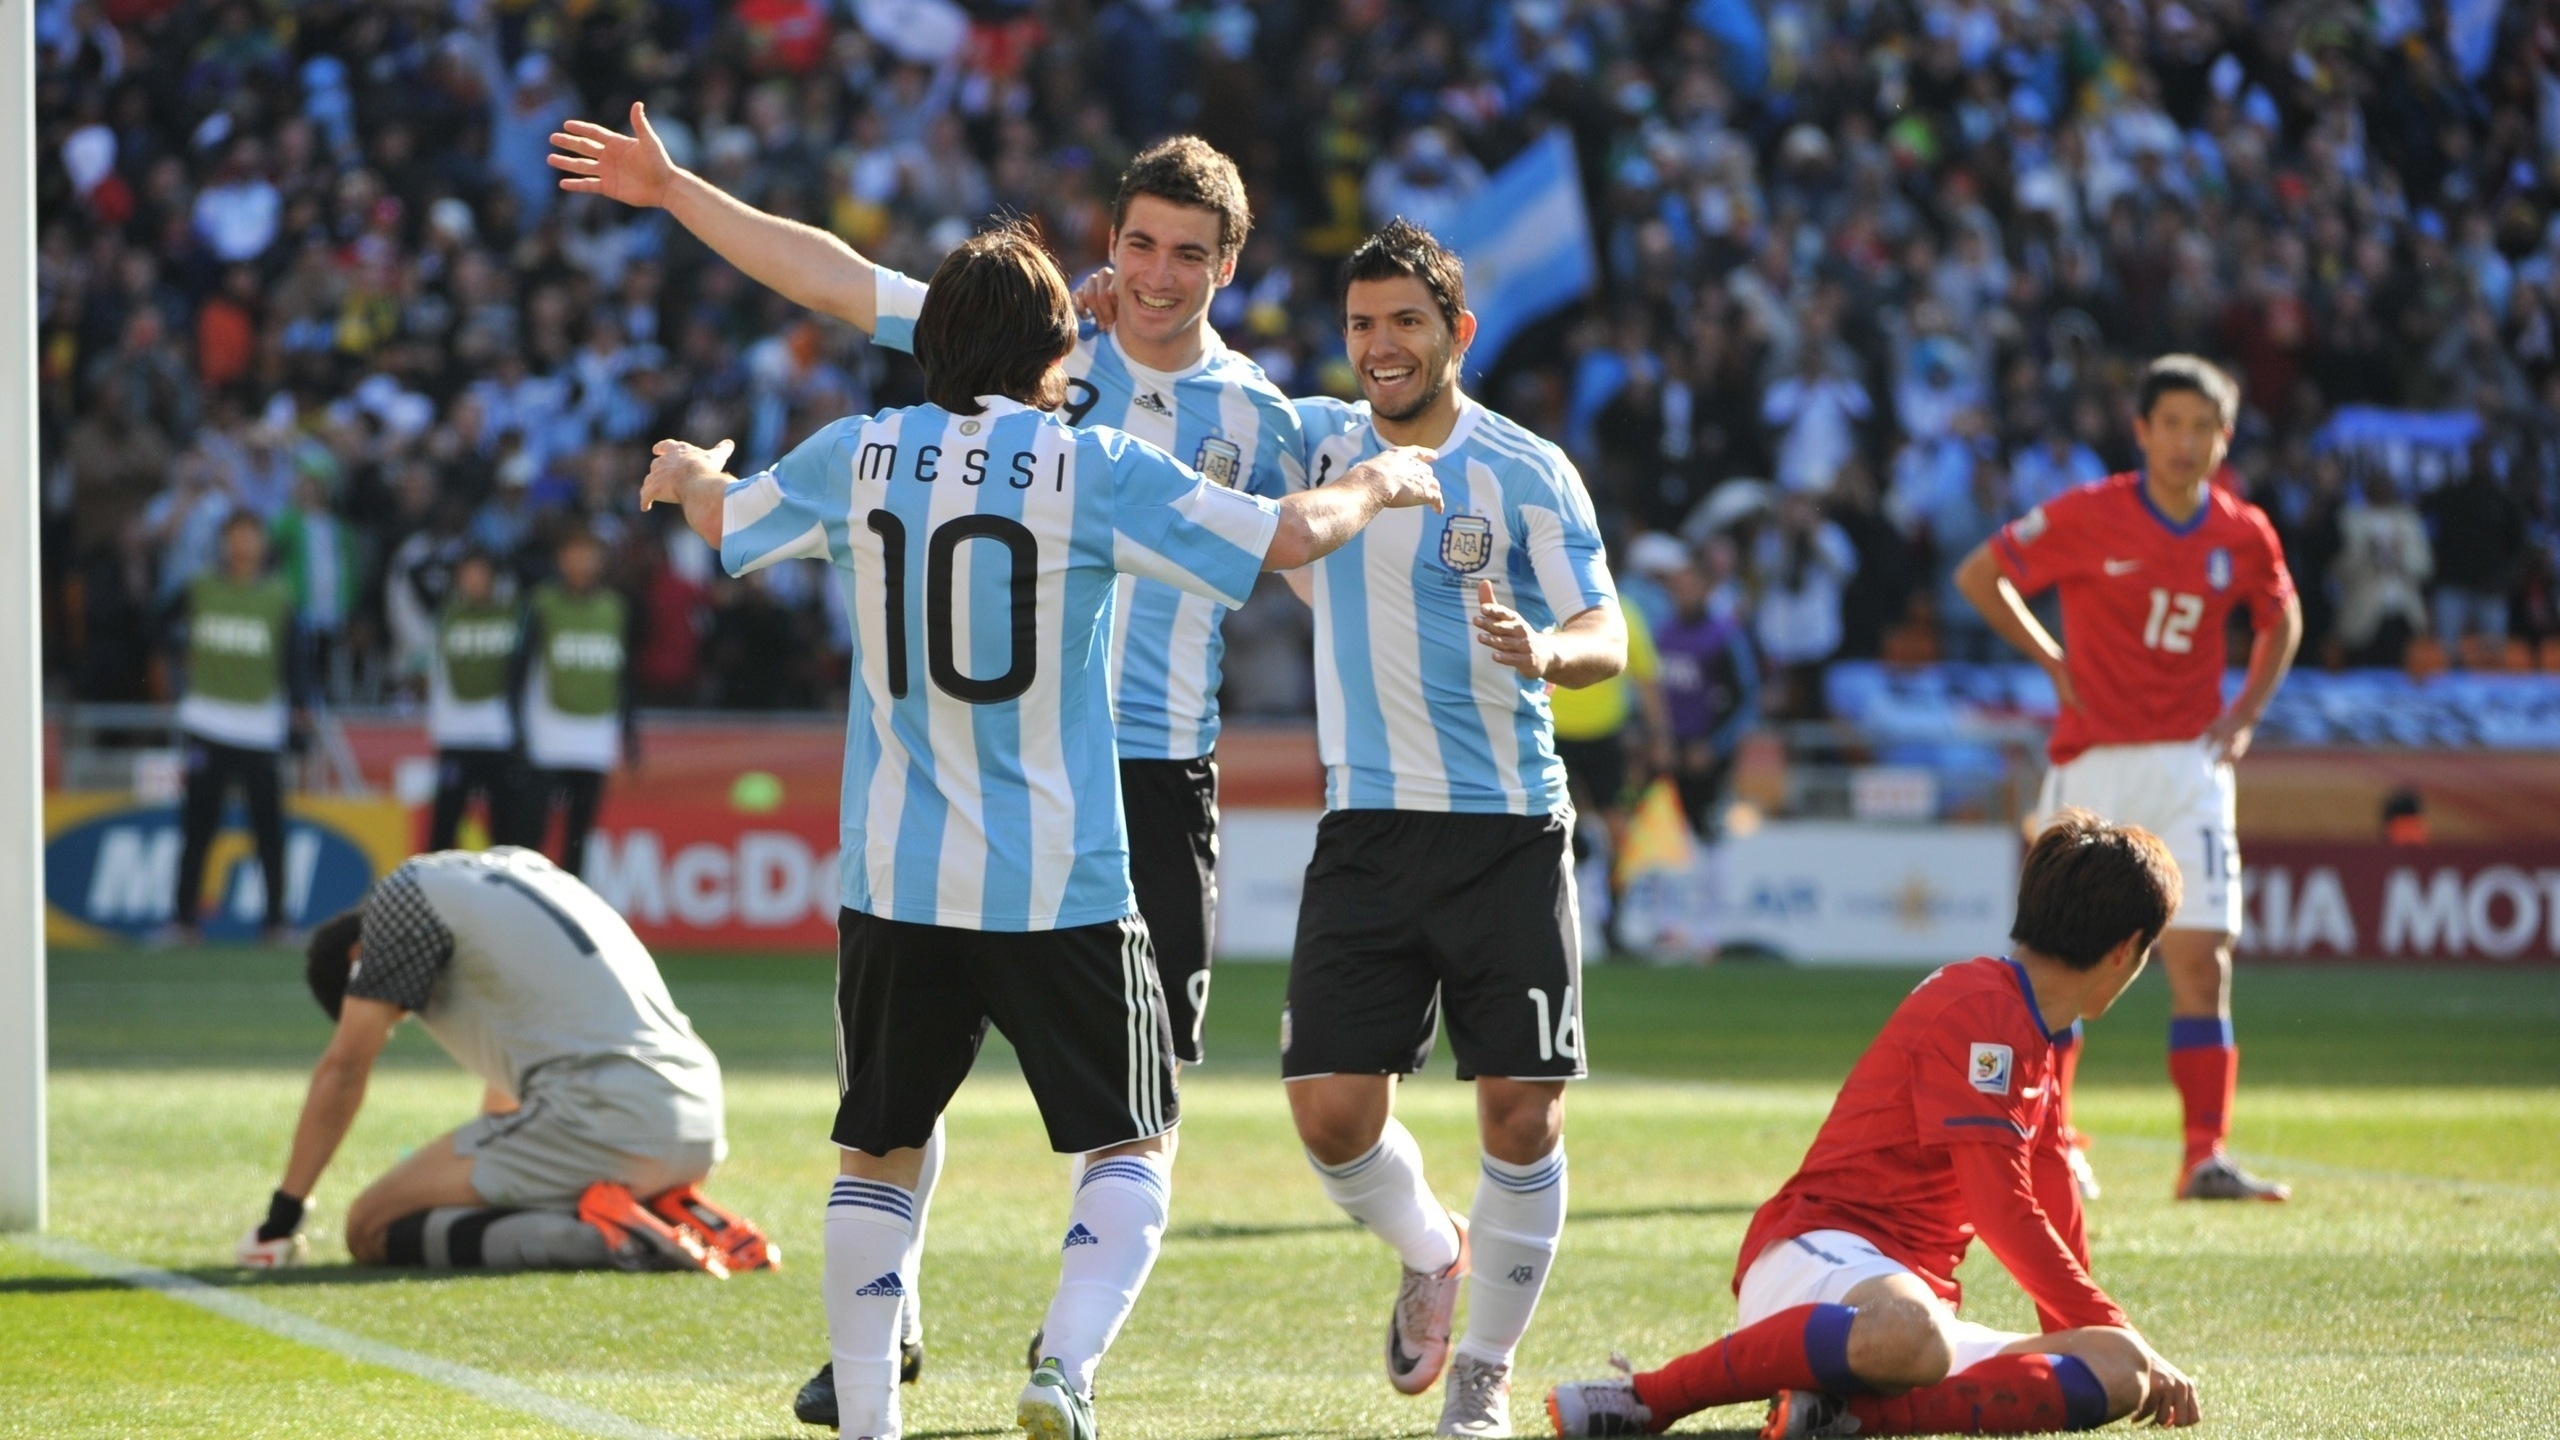 Argentina World Cup for 2560x1440 HDTV resolution